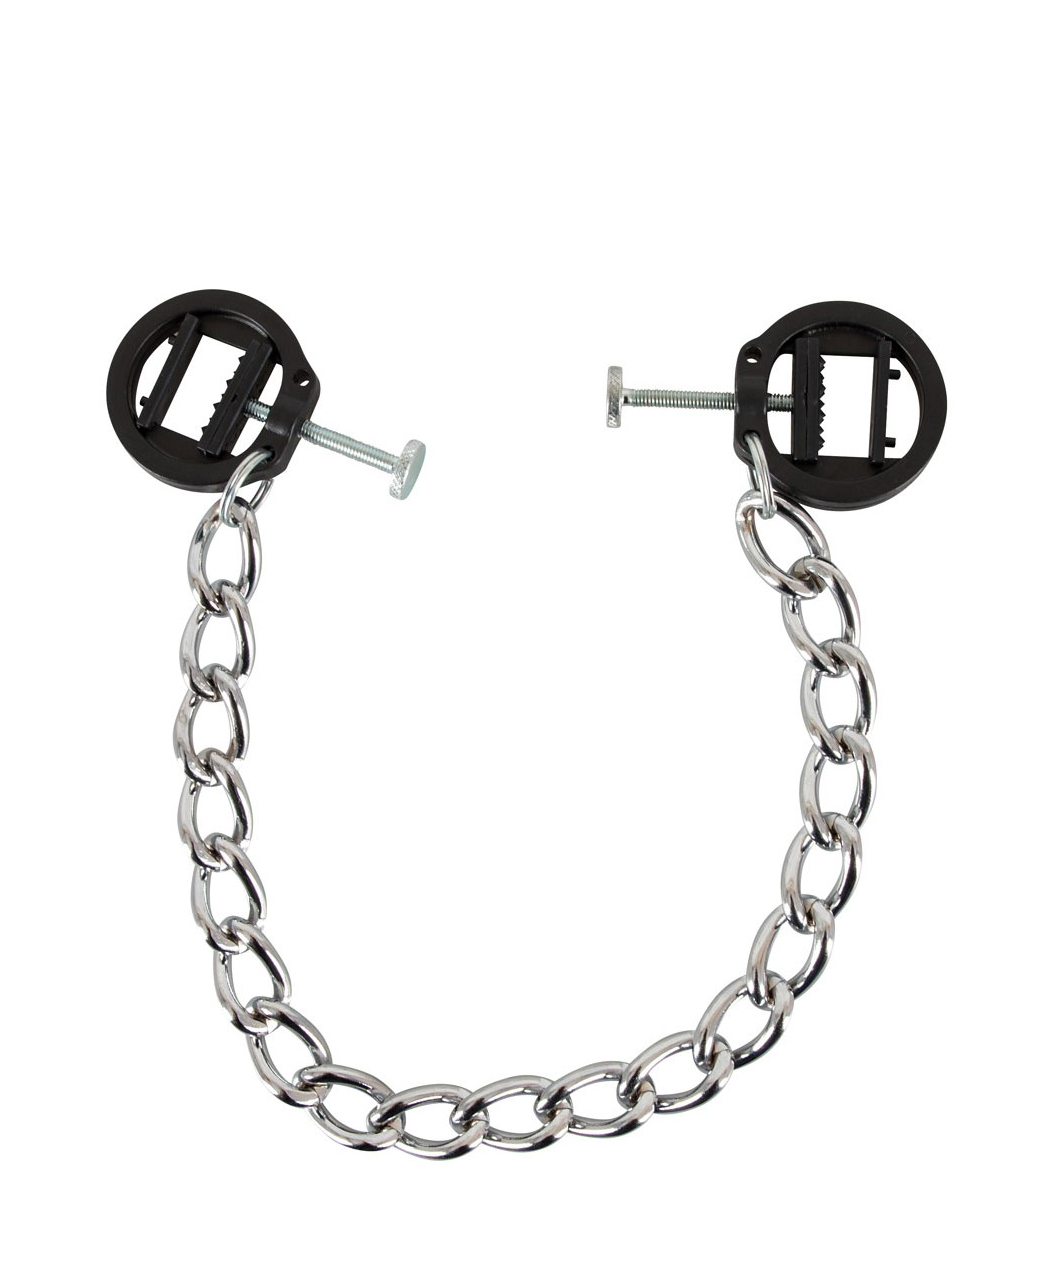 Bad Kitty Professional round nipple clamps